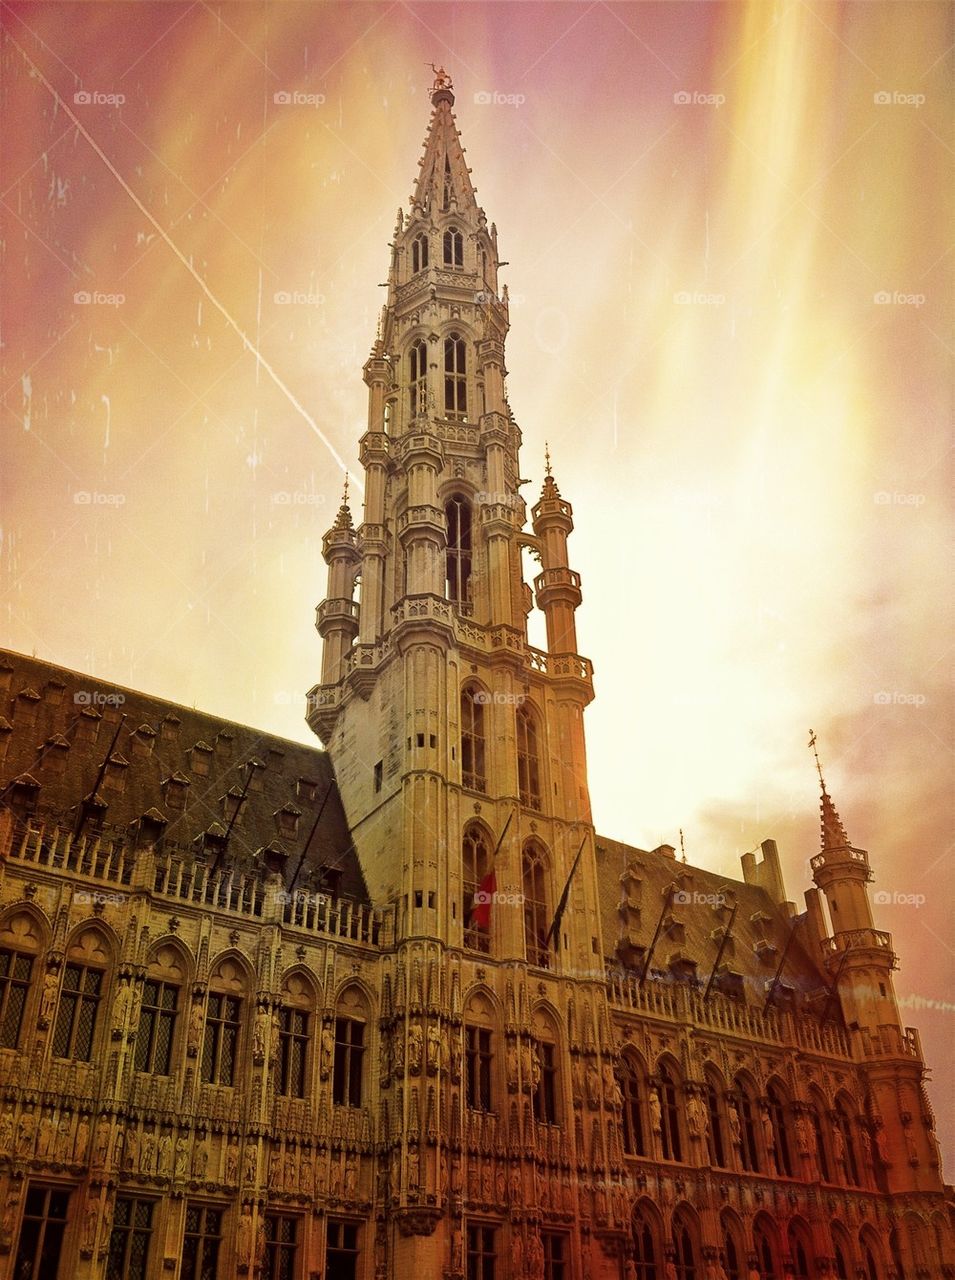 Brussels Town Hall in the Grand Place (Grote Markt)